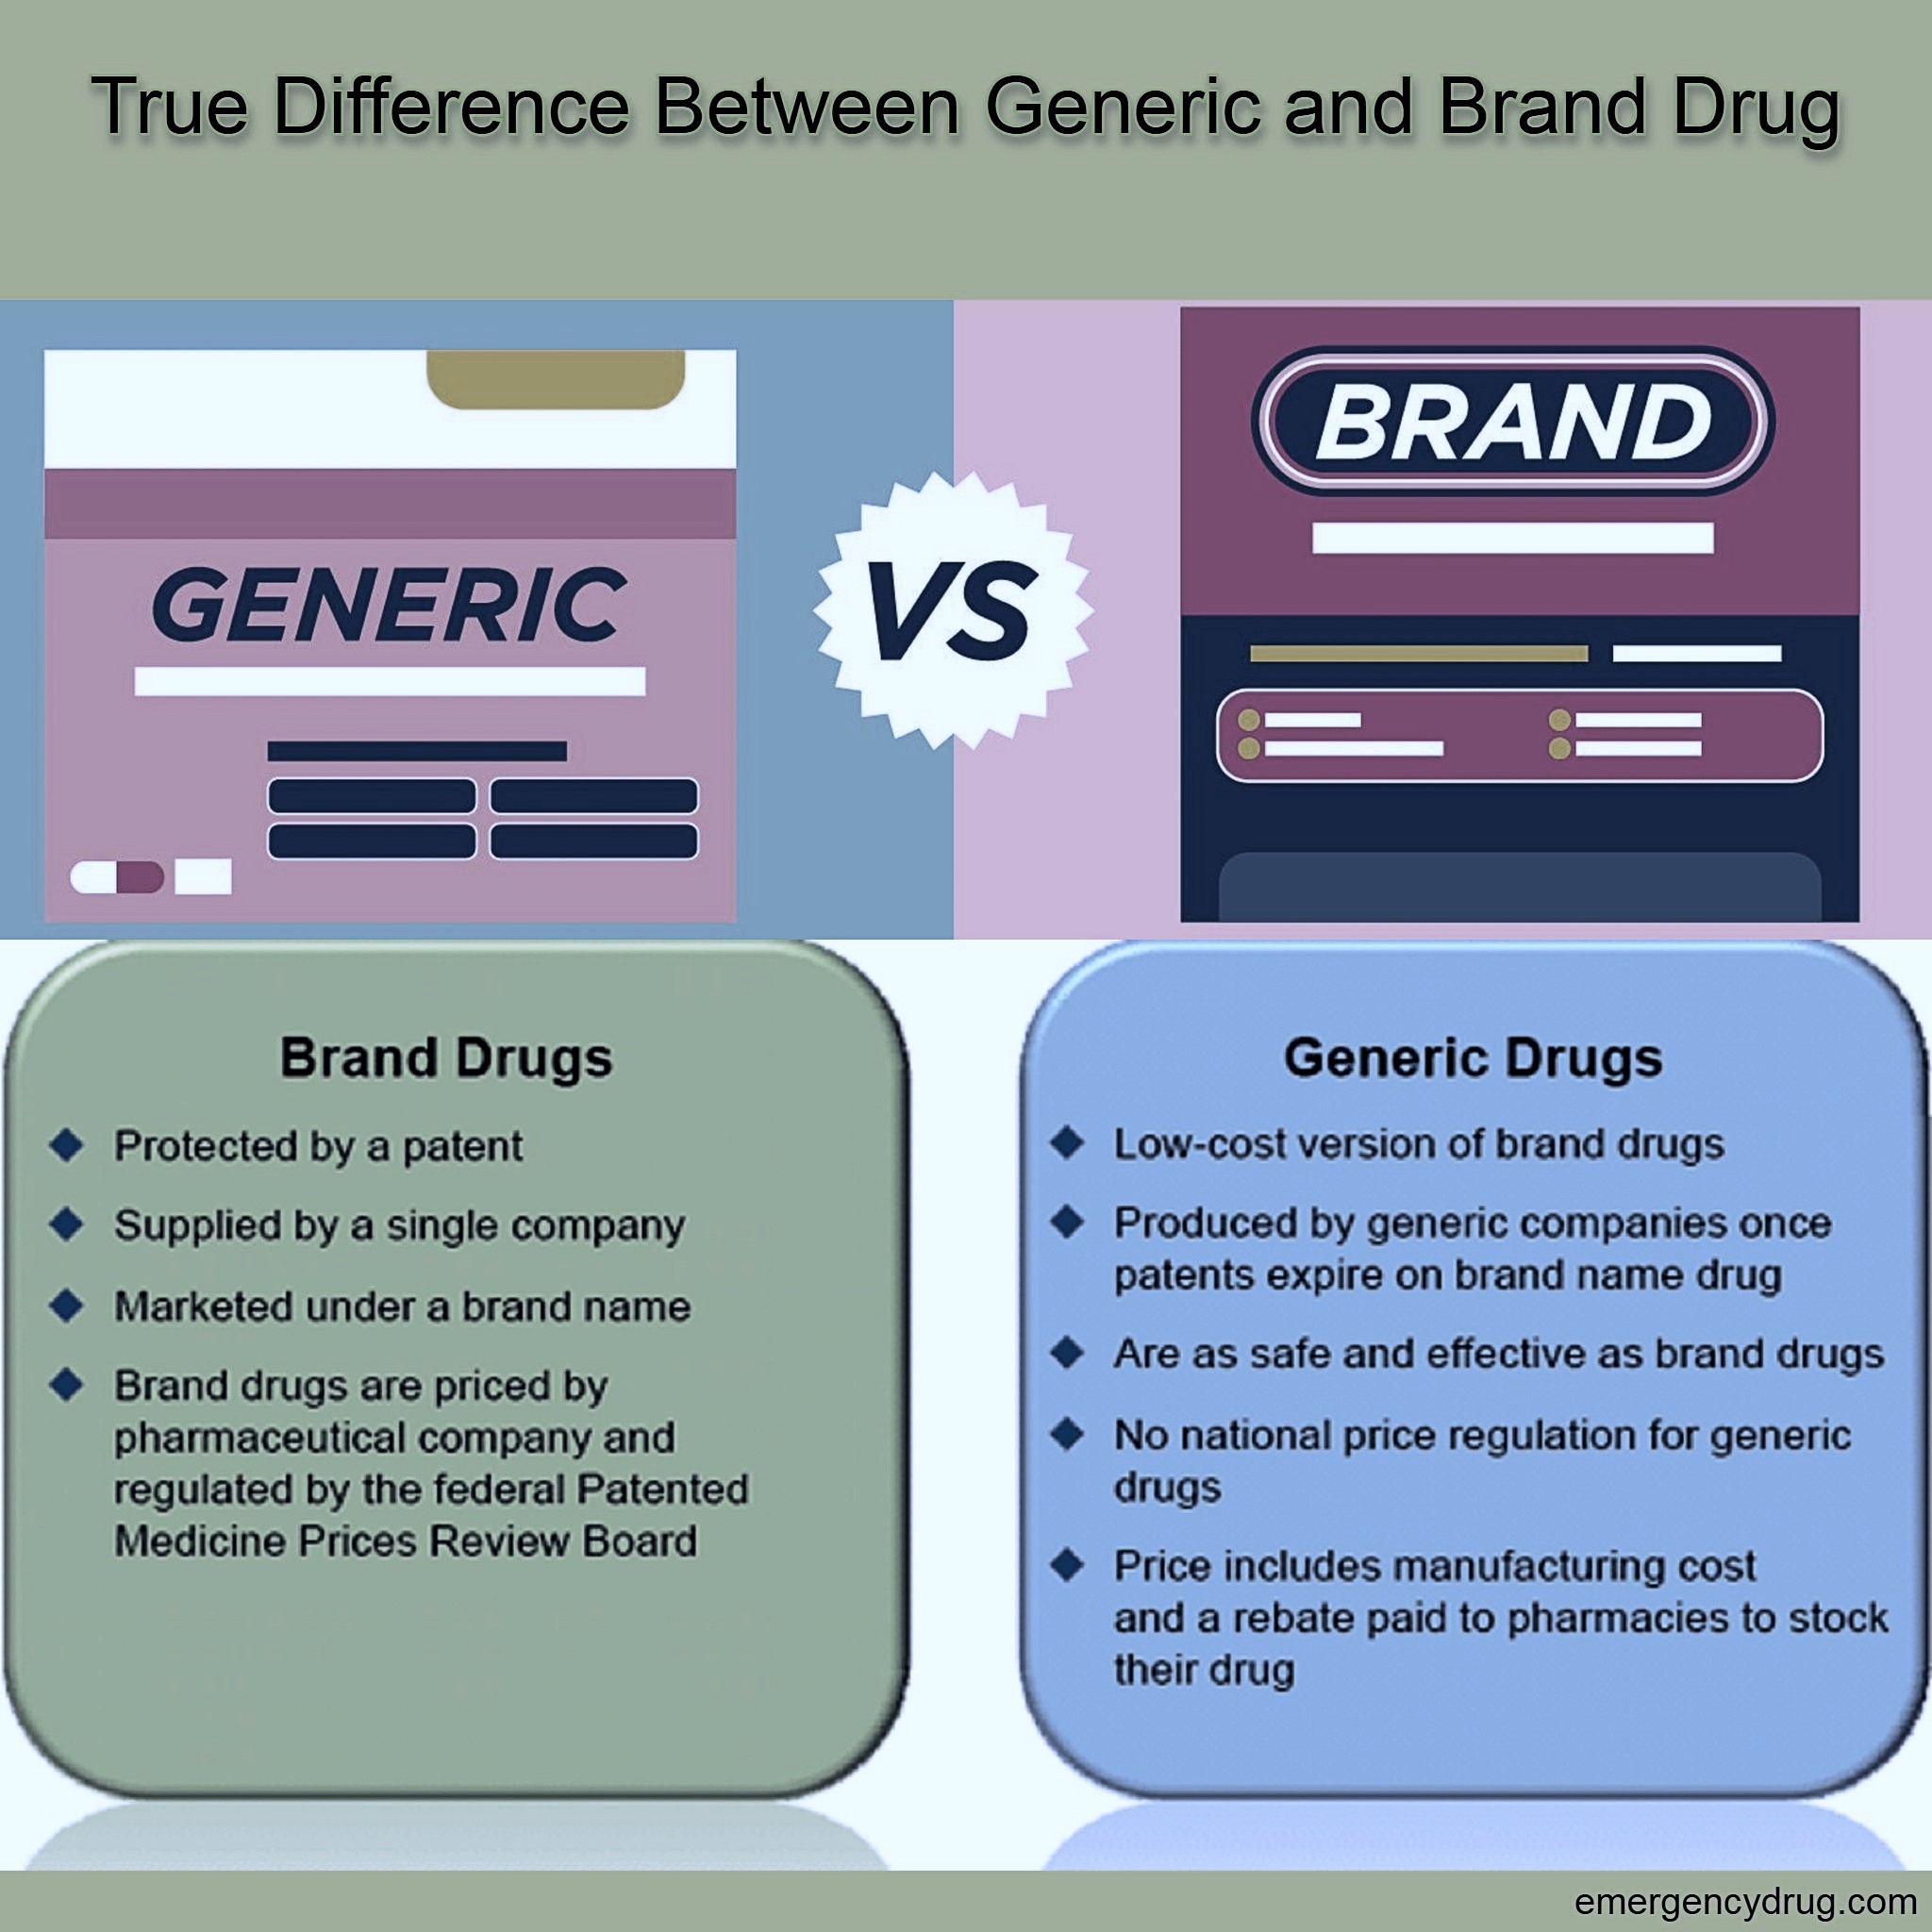 Generic Vs Non-Generic Medicines: Everything You Need To Know